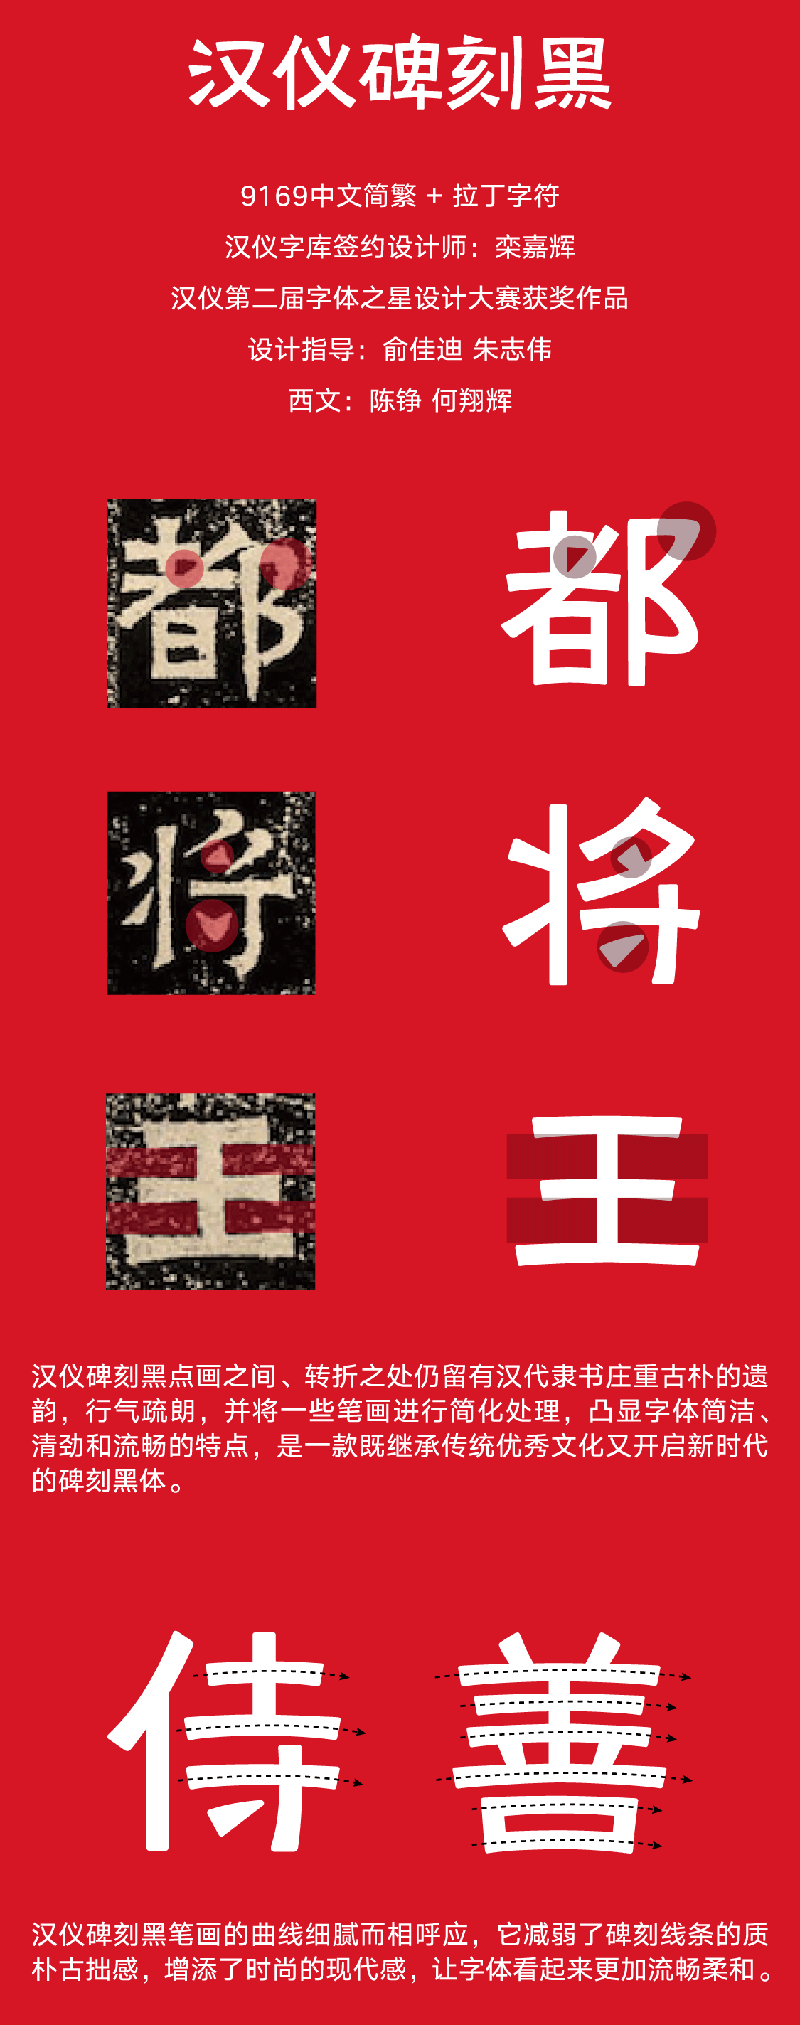 Happy Chinese font-Old Xu, do you want Chinese Spring Festival couplets